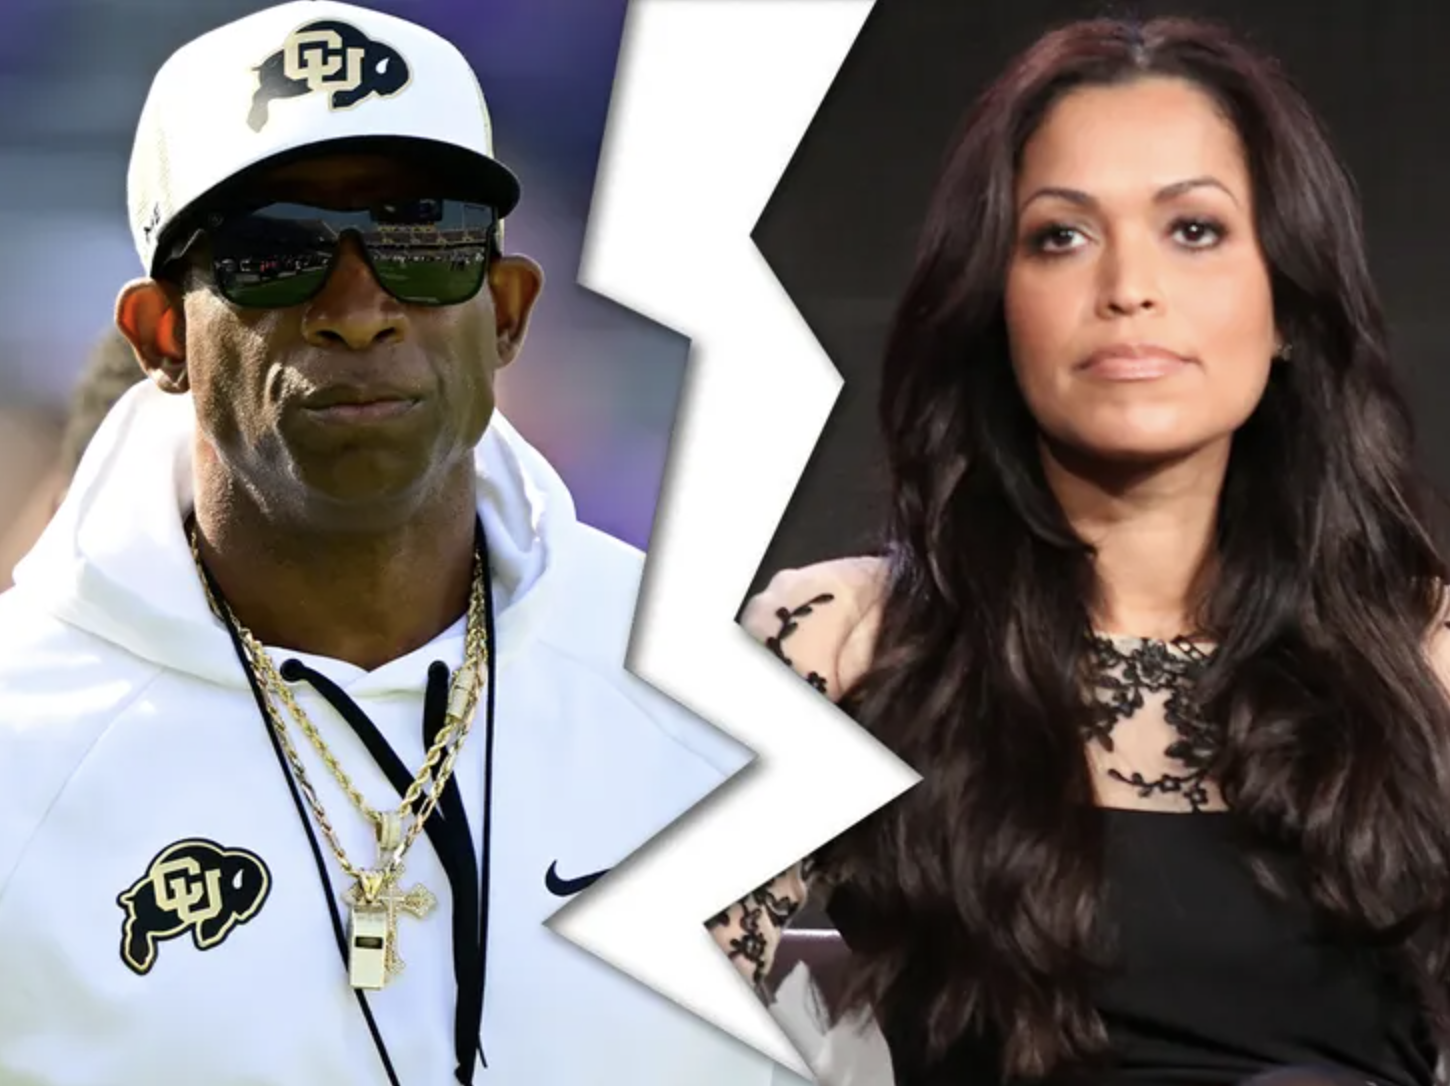 Deion Sanders and Tracey Edmonds Part Ways After Over a Decade Together, Including a 4-Year Engagement.